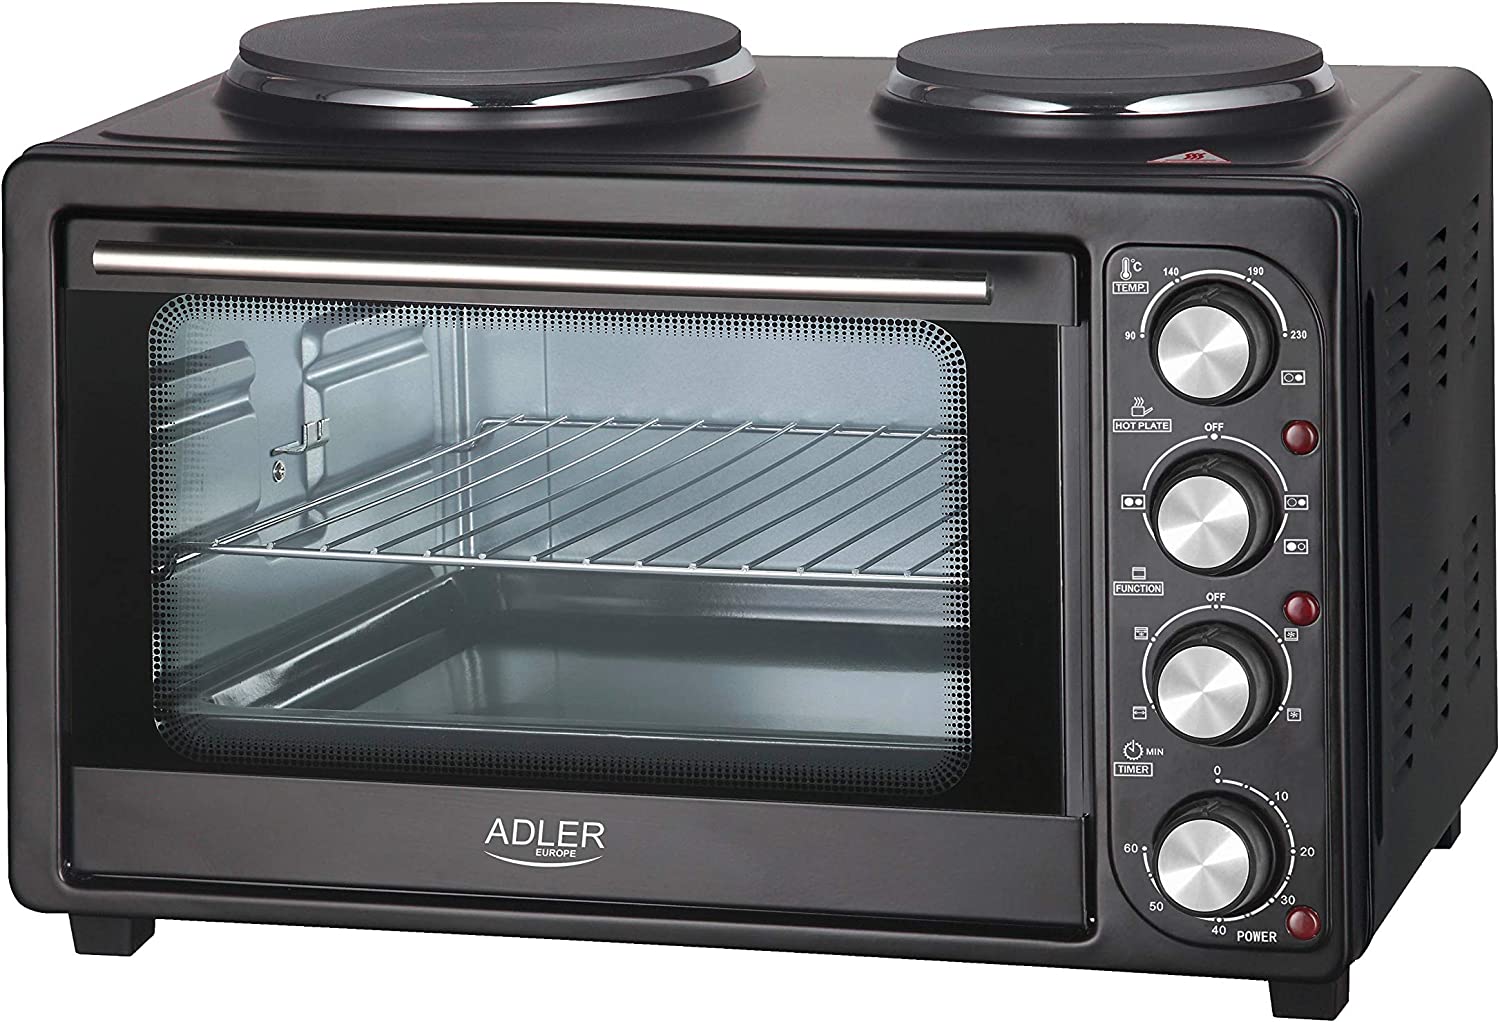 JUNG ADLER AD6020 Mini Oven 36 L with 2 Electric Hob Plates, Mini Oven with Hob Top, 4600 W, with Circulating Air, Timer 60 Minutes, 5 Heating Modes, Includes Grill, Rotisserie Baking Tray